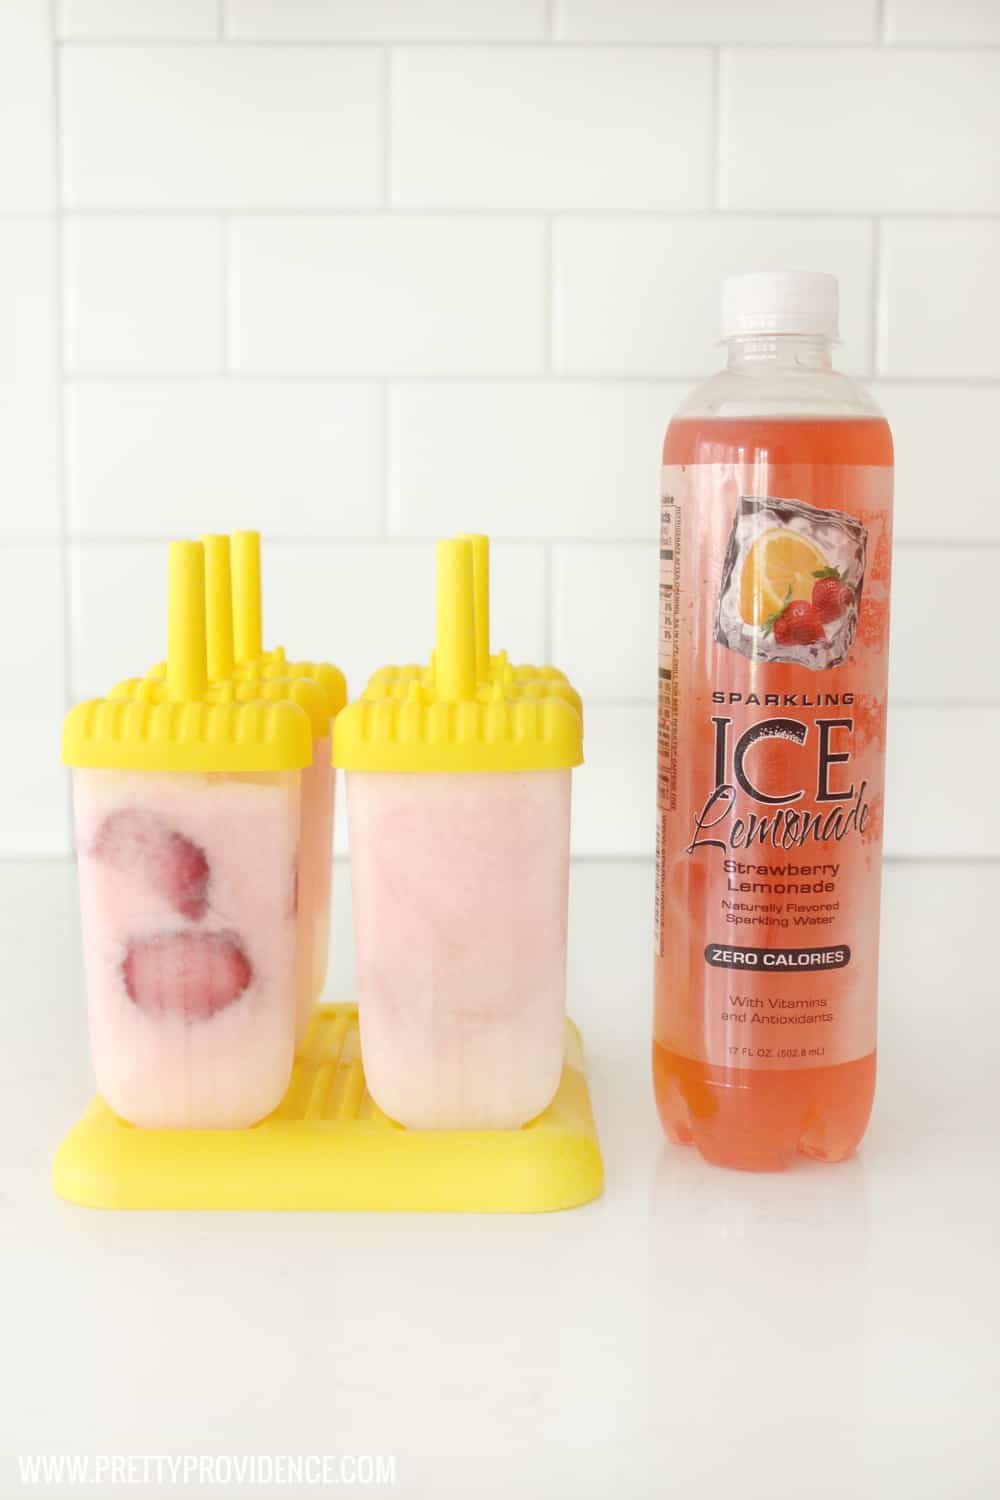 Talk about delicious! These frosted strawberry lemonade popsicles are only 35 calories each! Great way to curb that sweet tooth! 